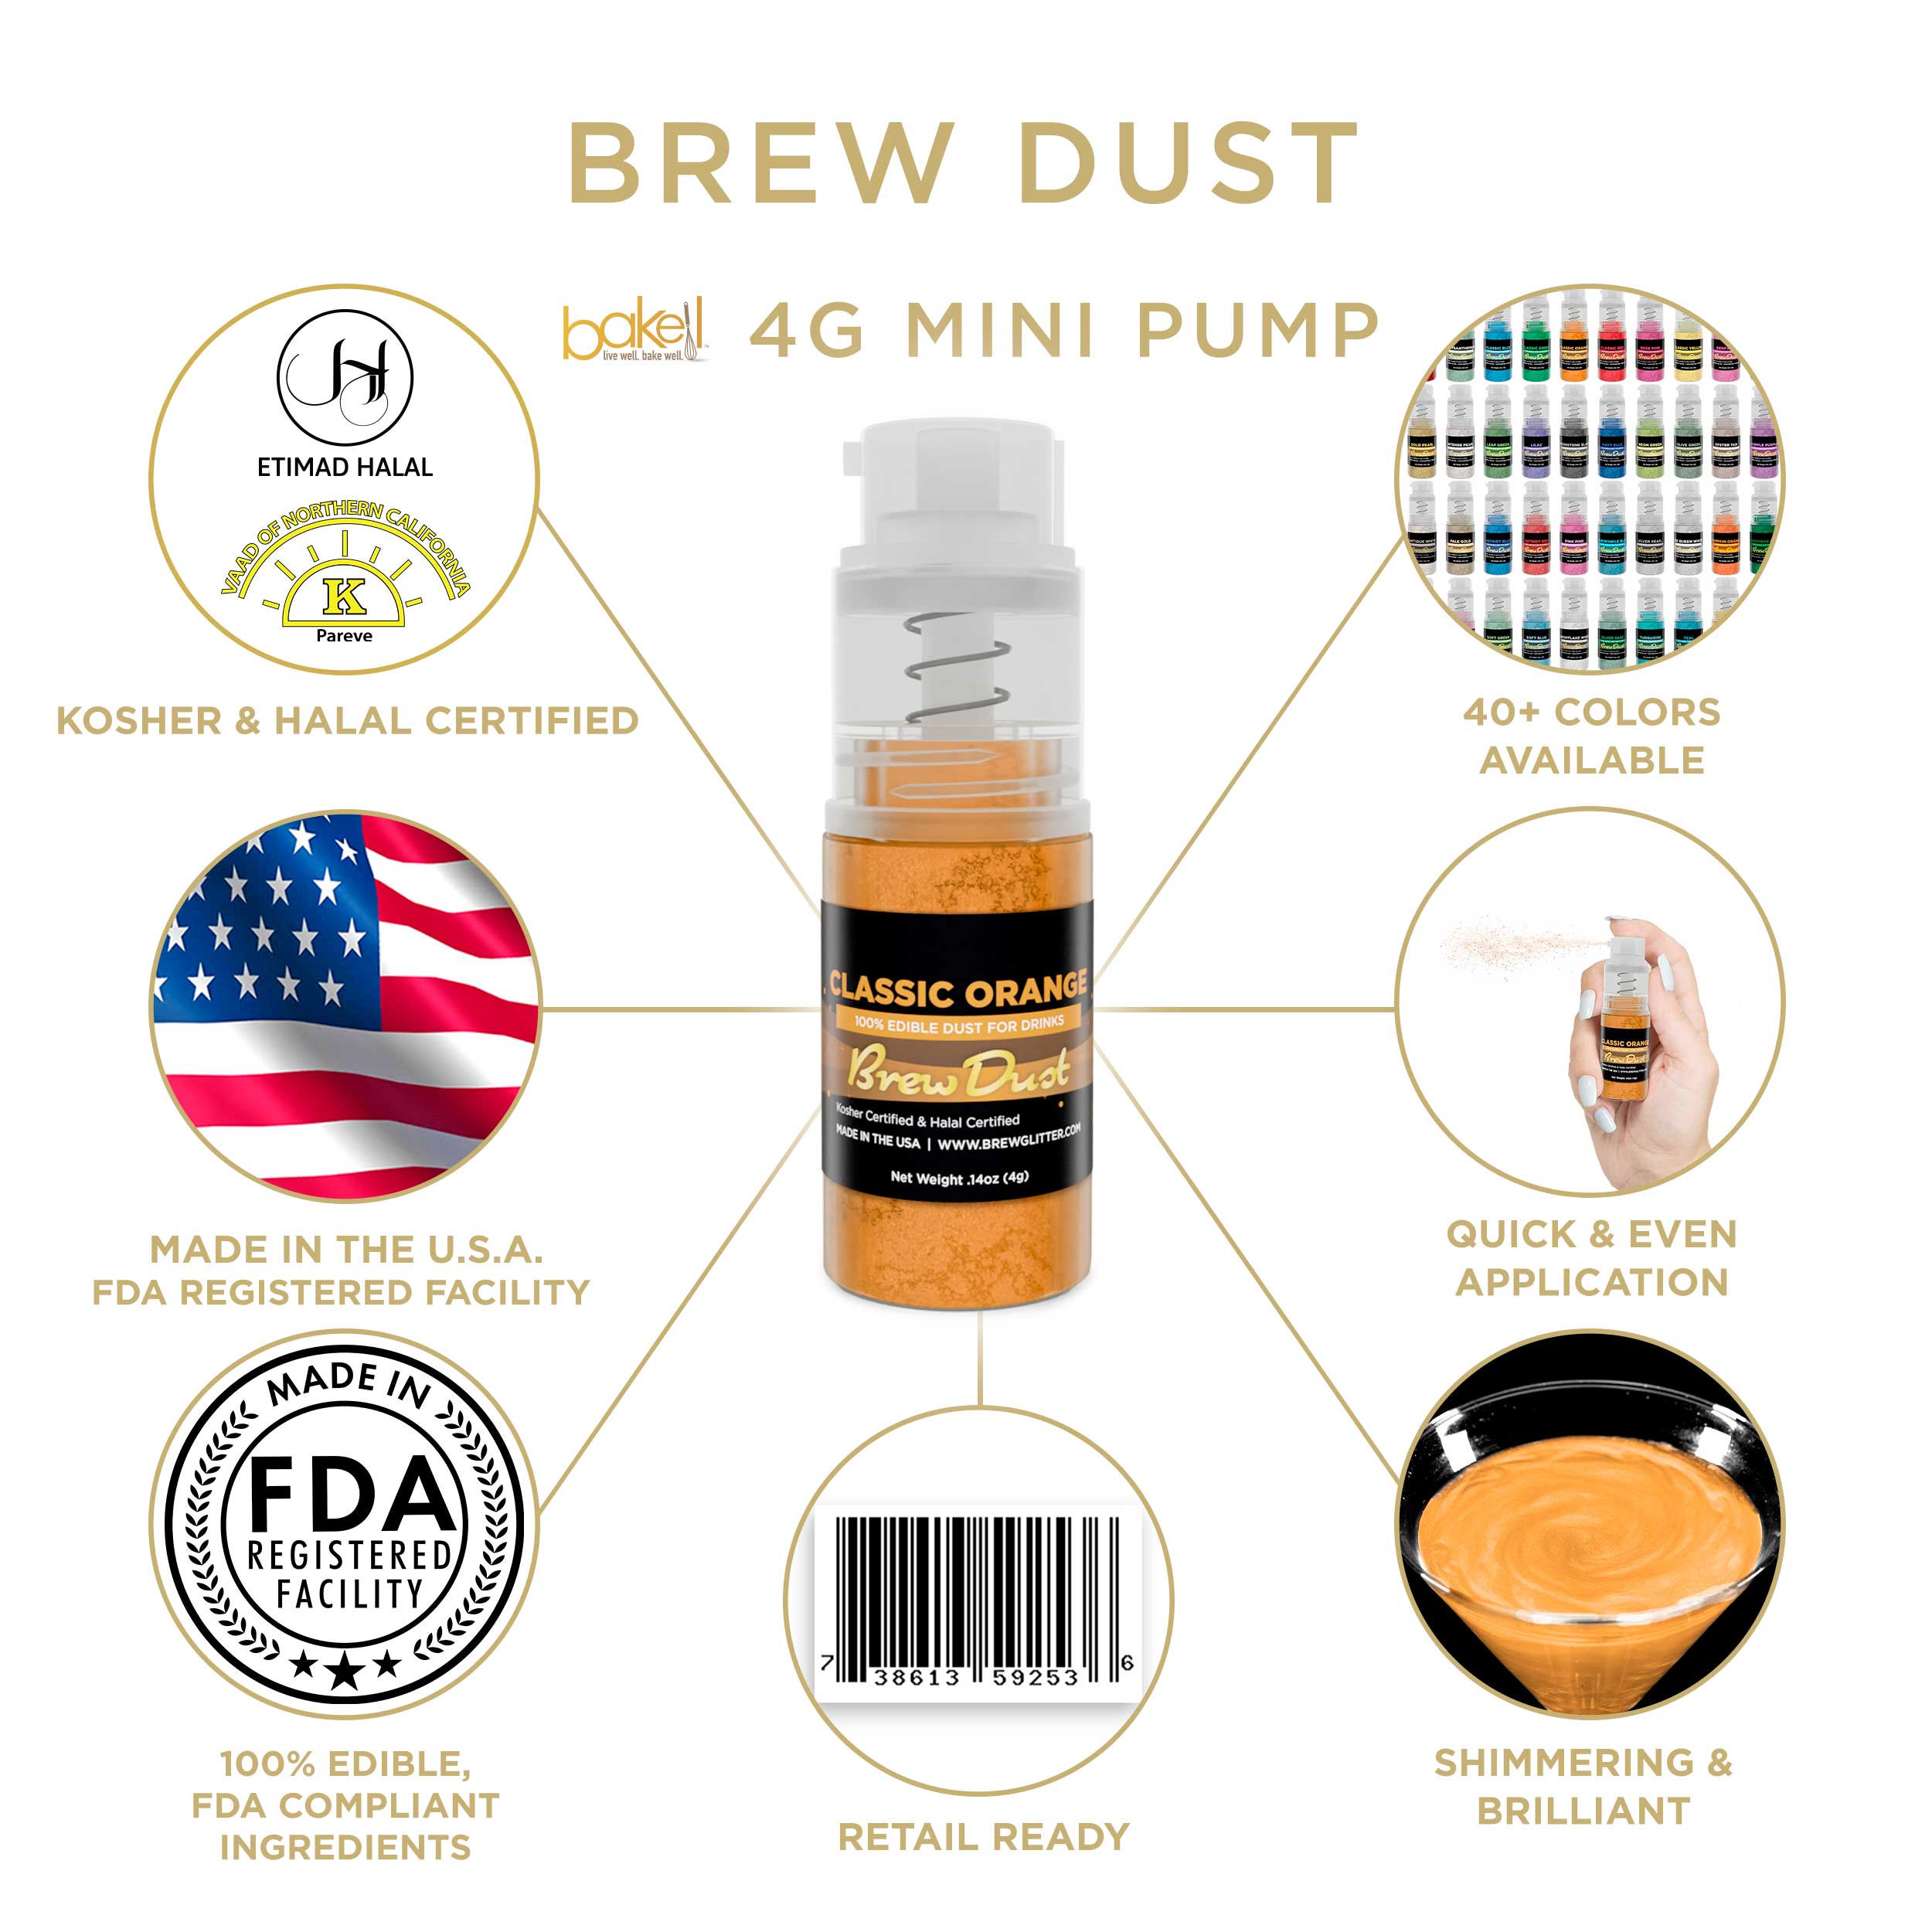 Classic Orange Brew Dust Miniature Spray Pump | Infographic and Information